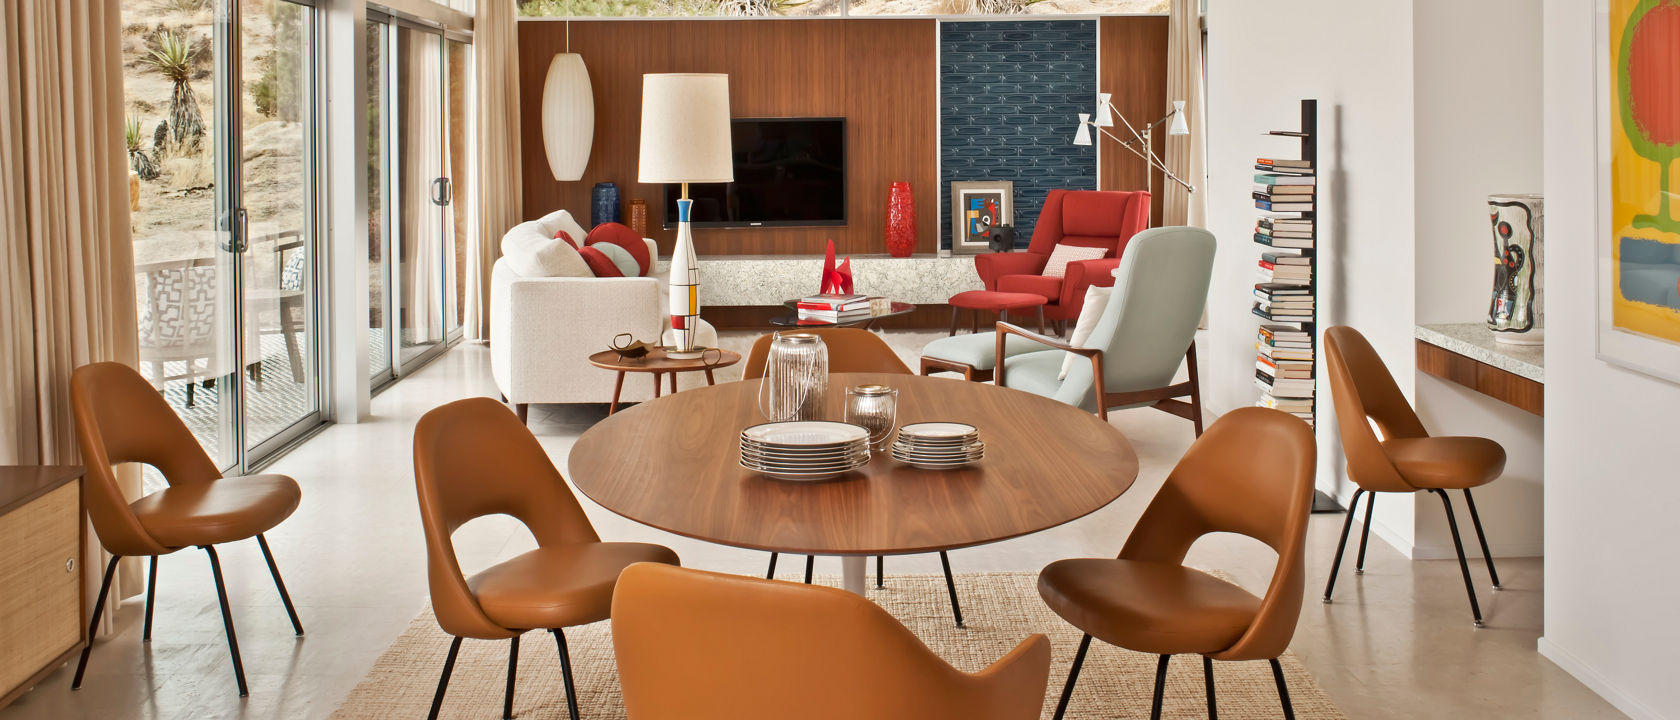 a mid-century modern dining room and living room.